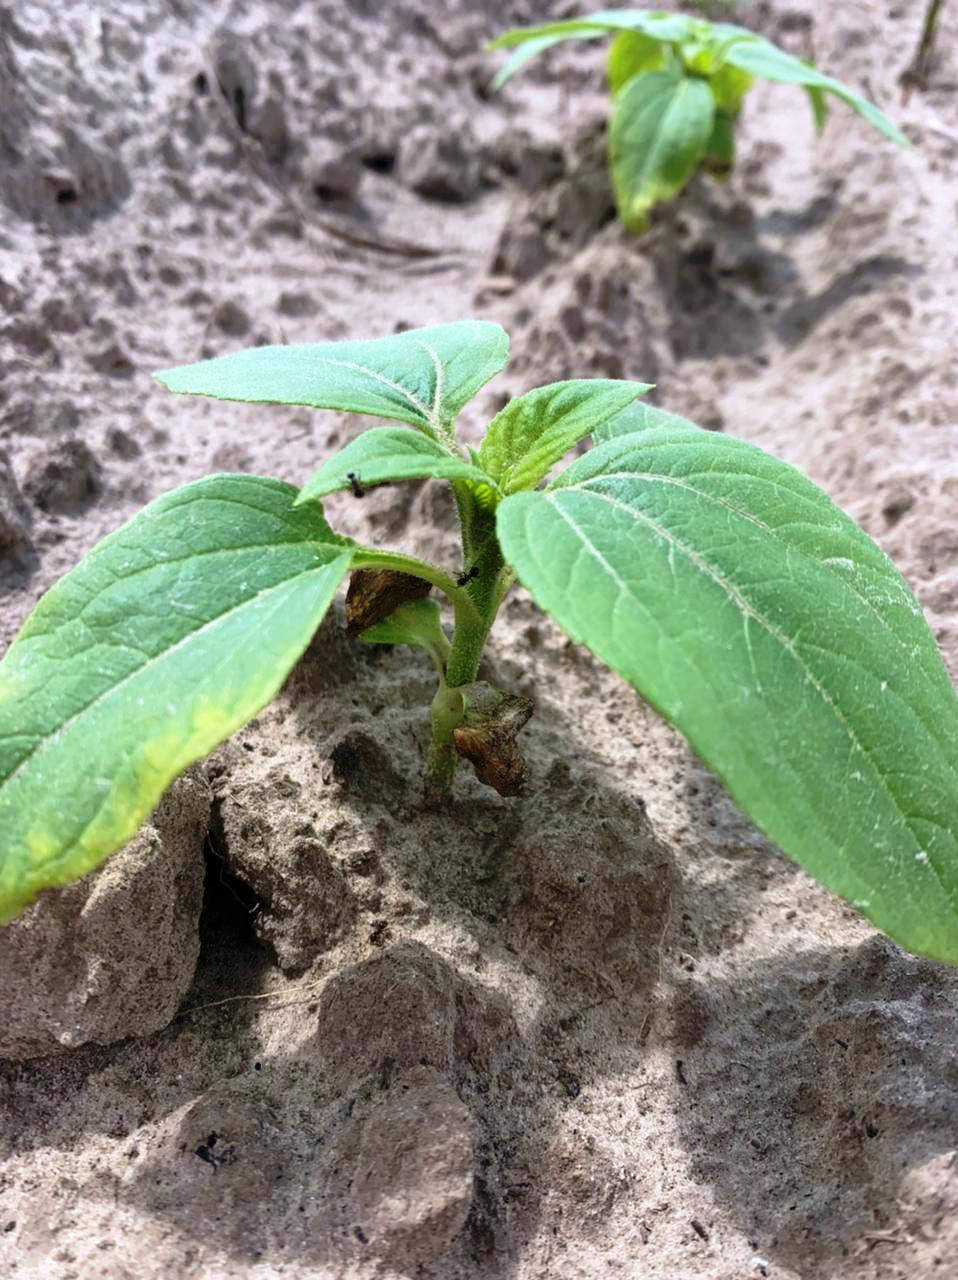 Herbicides toxicity for sunflower germination and seedlings